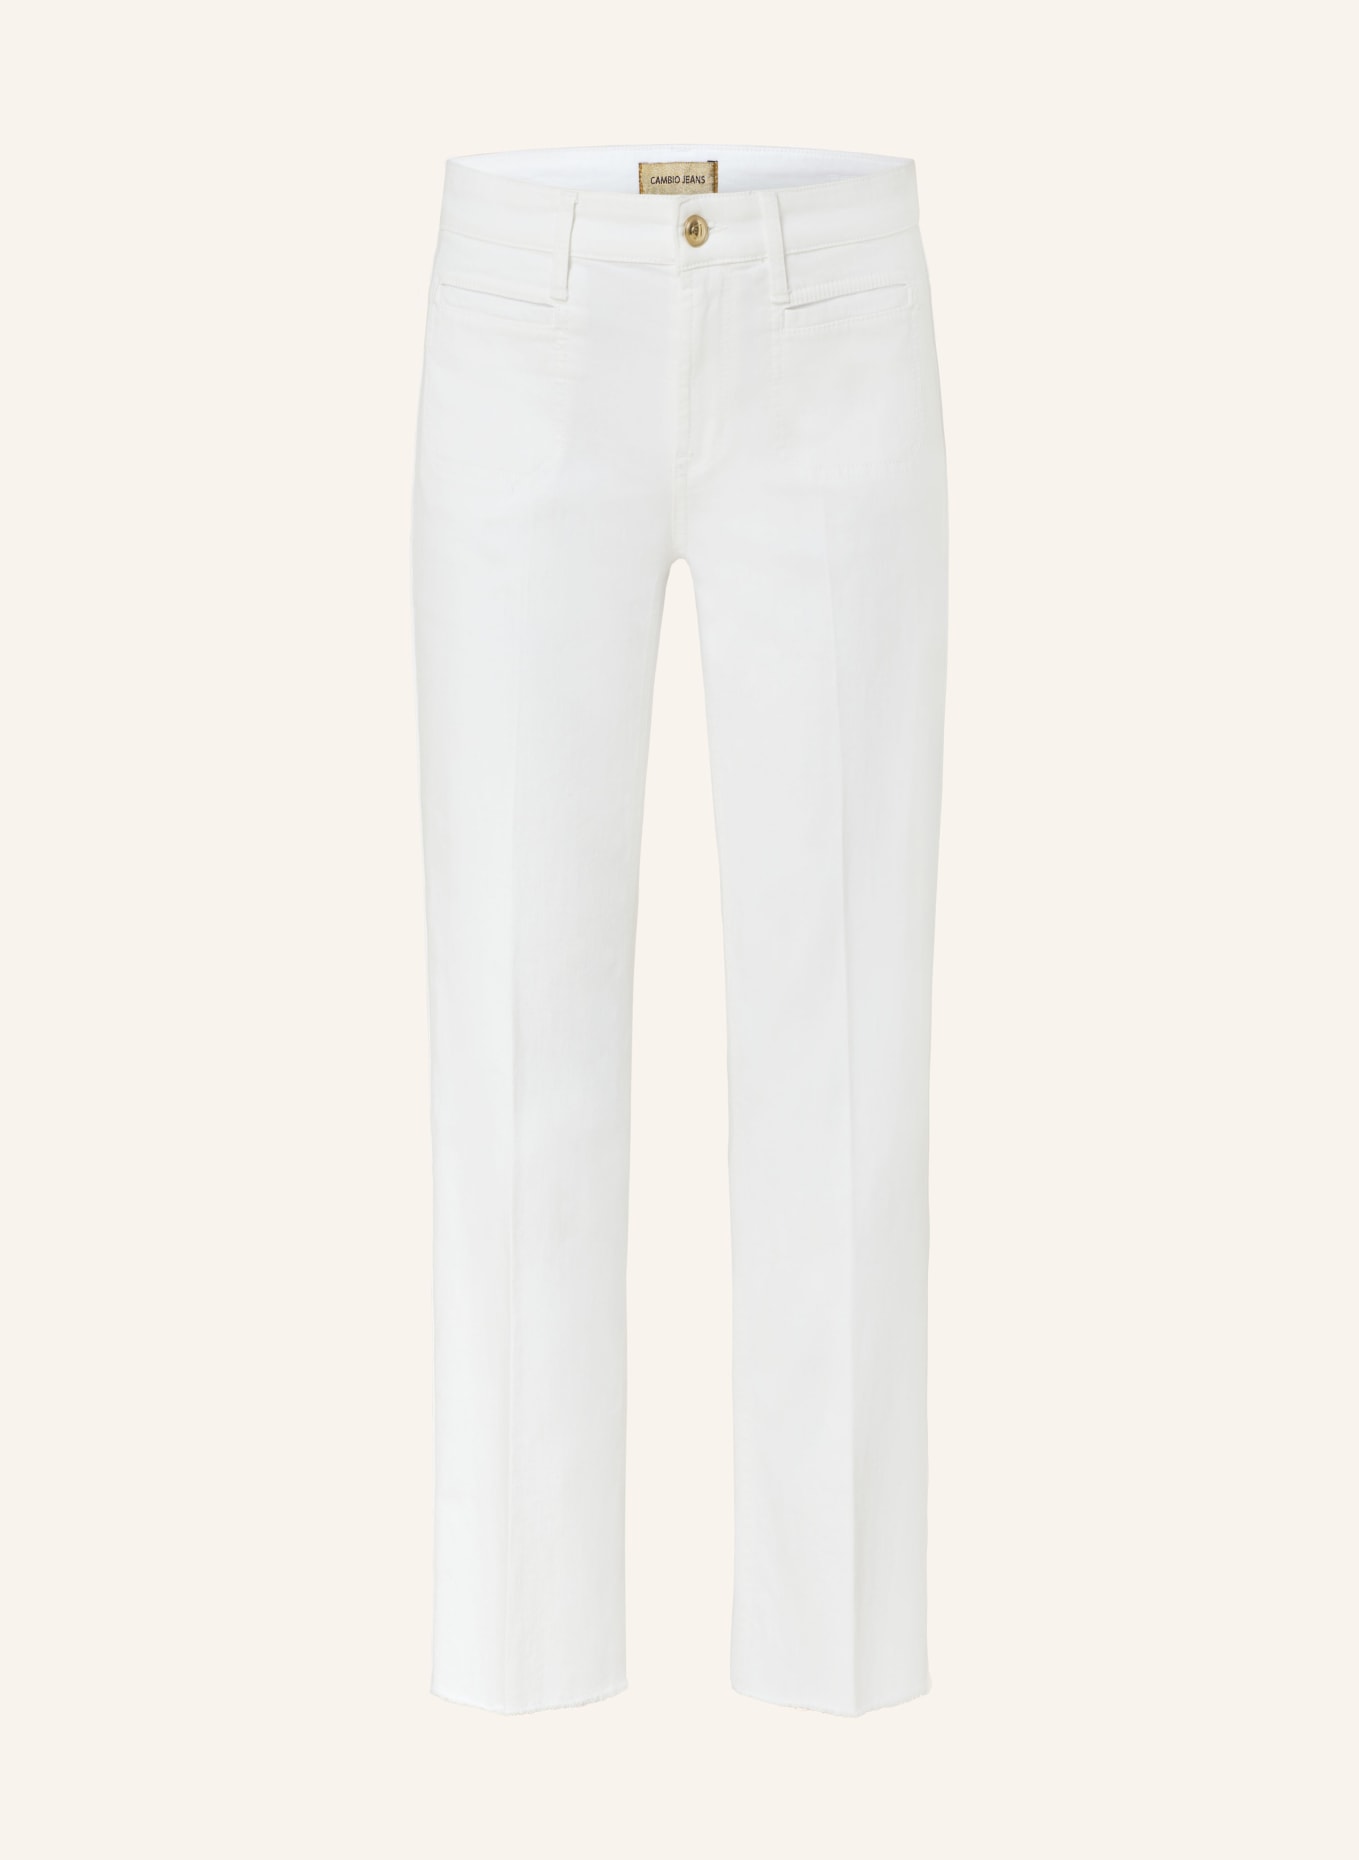 CAMBIO Jeans TESS, Color: 5007 classy white & fringed (Image 1)